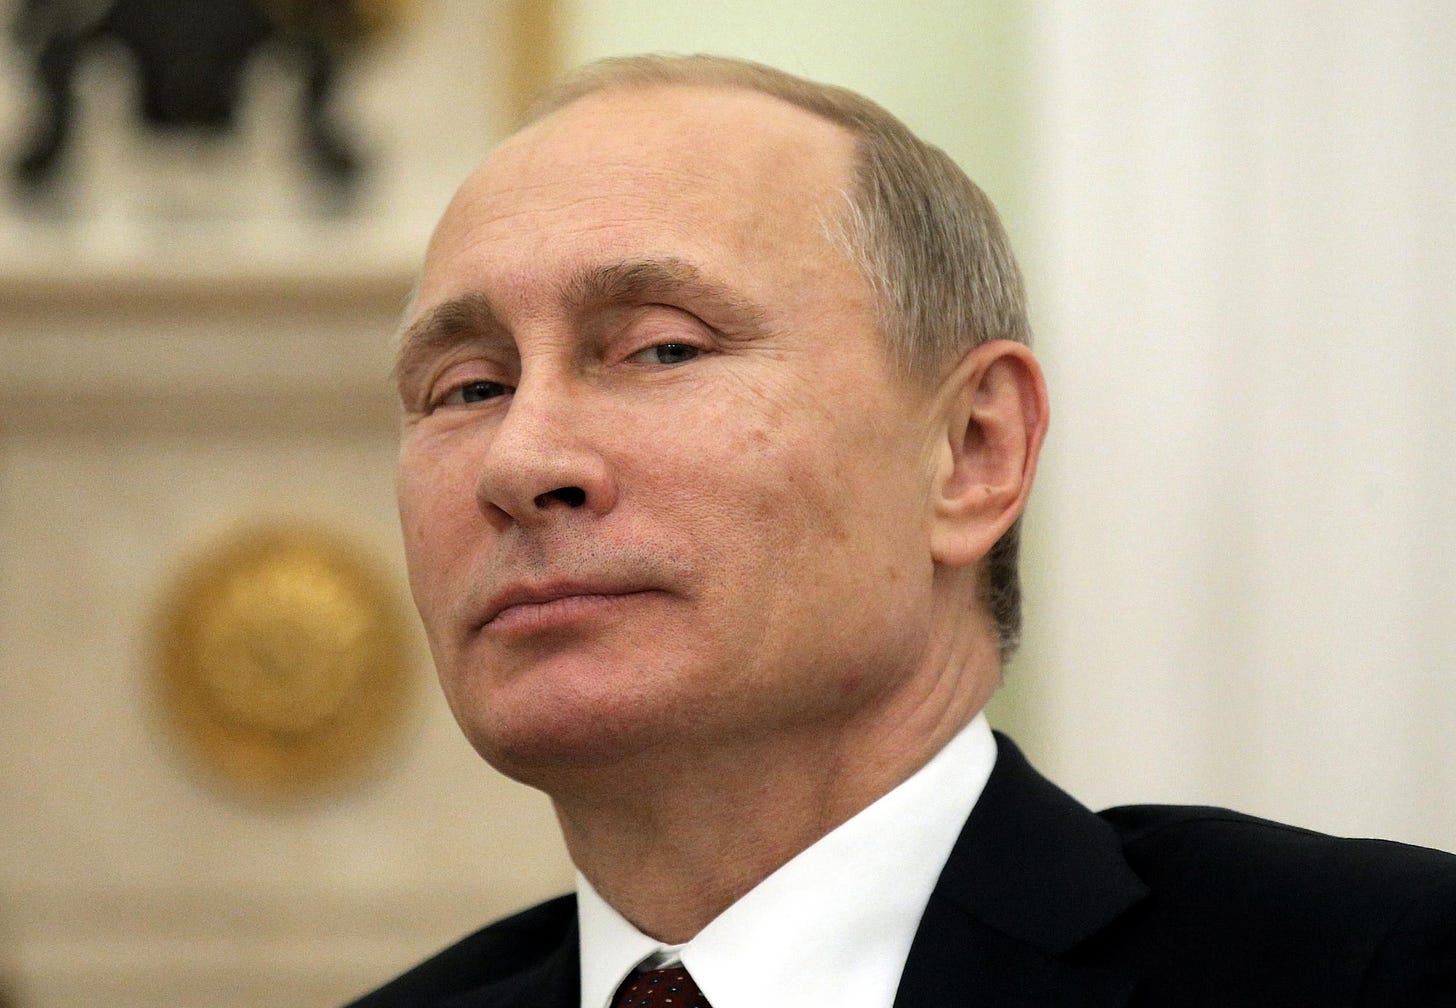 15 Times Vladimir Putin Beat The West | TheRichest